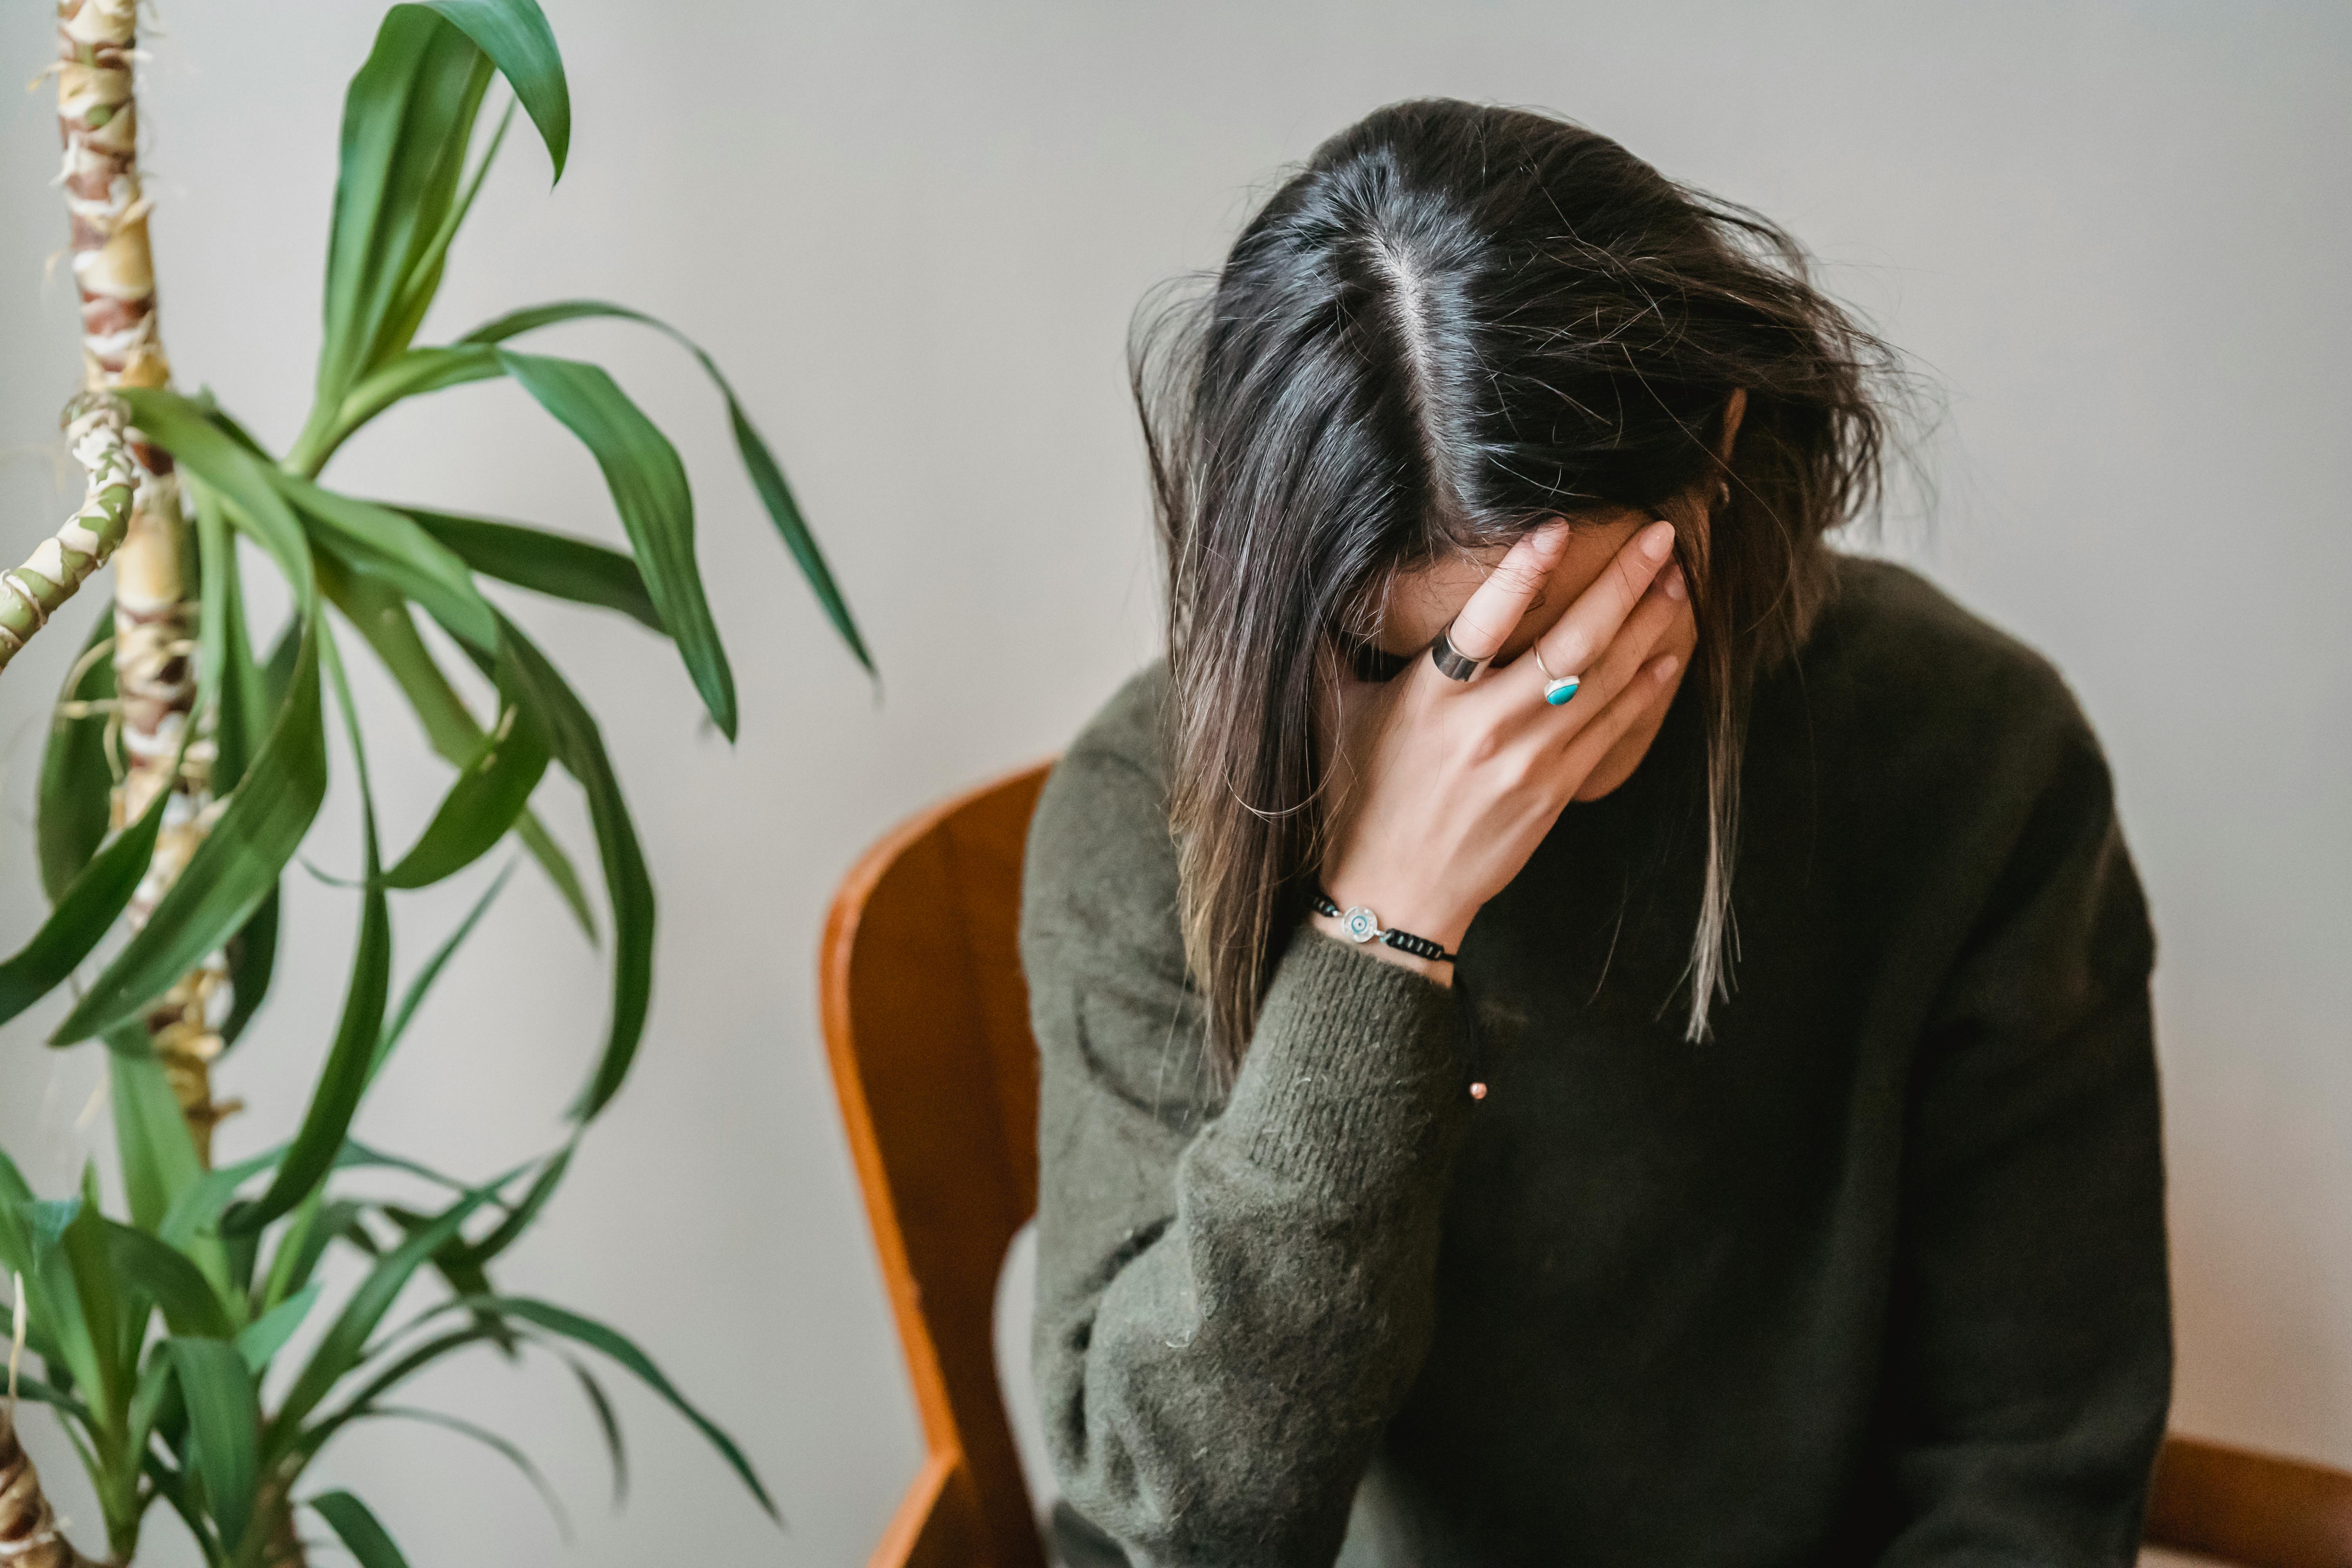 An upset woman with her head in her hands | Source: Pexels